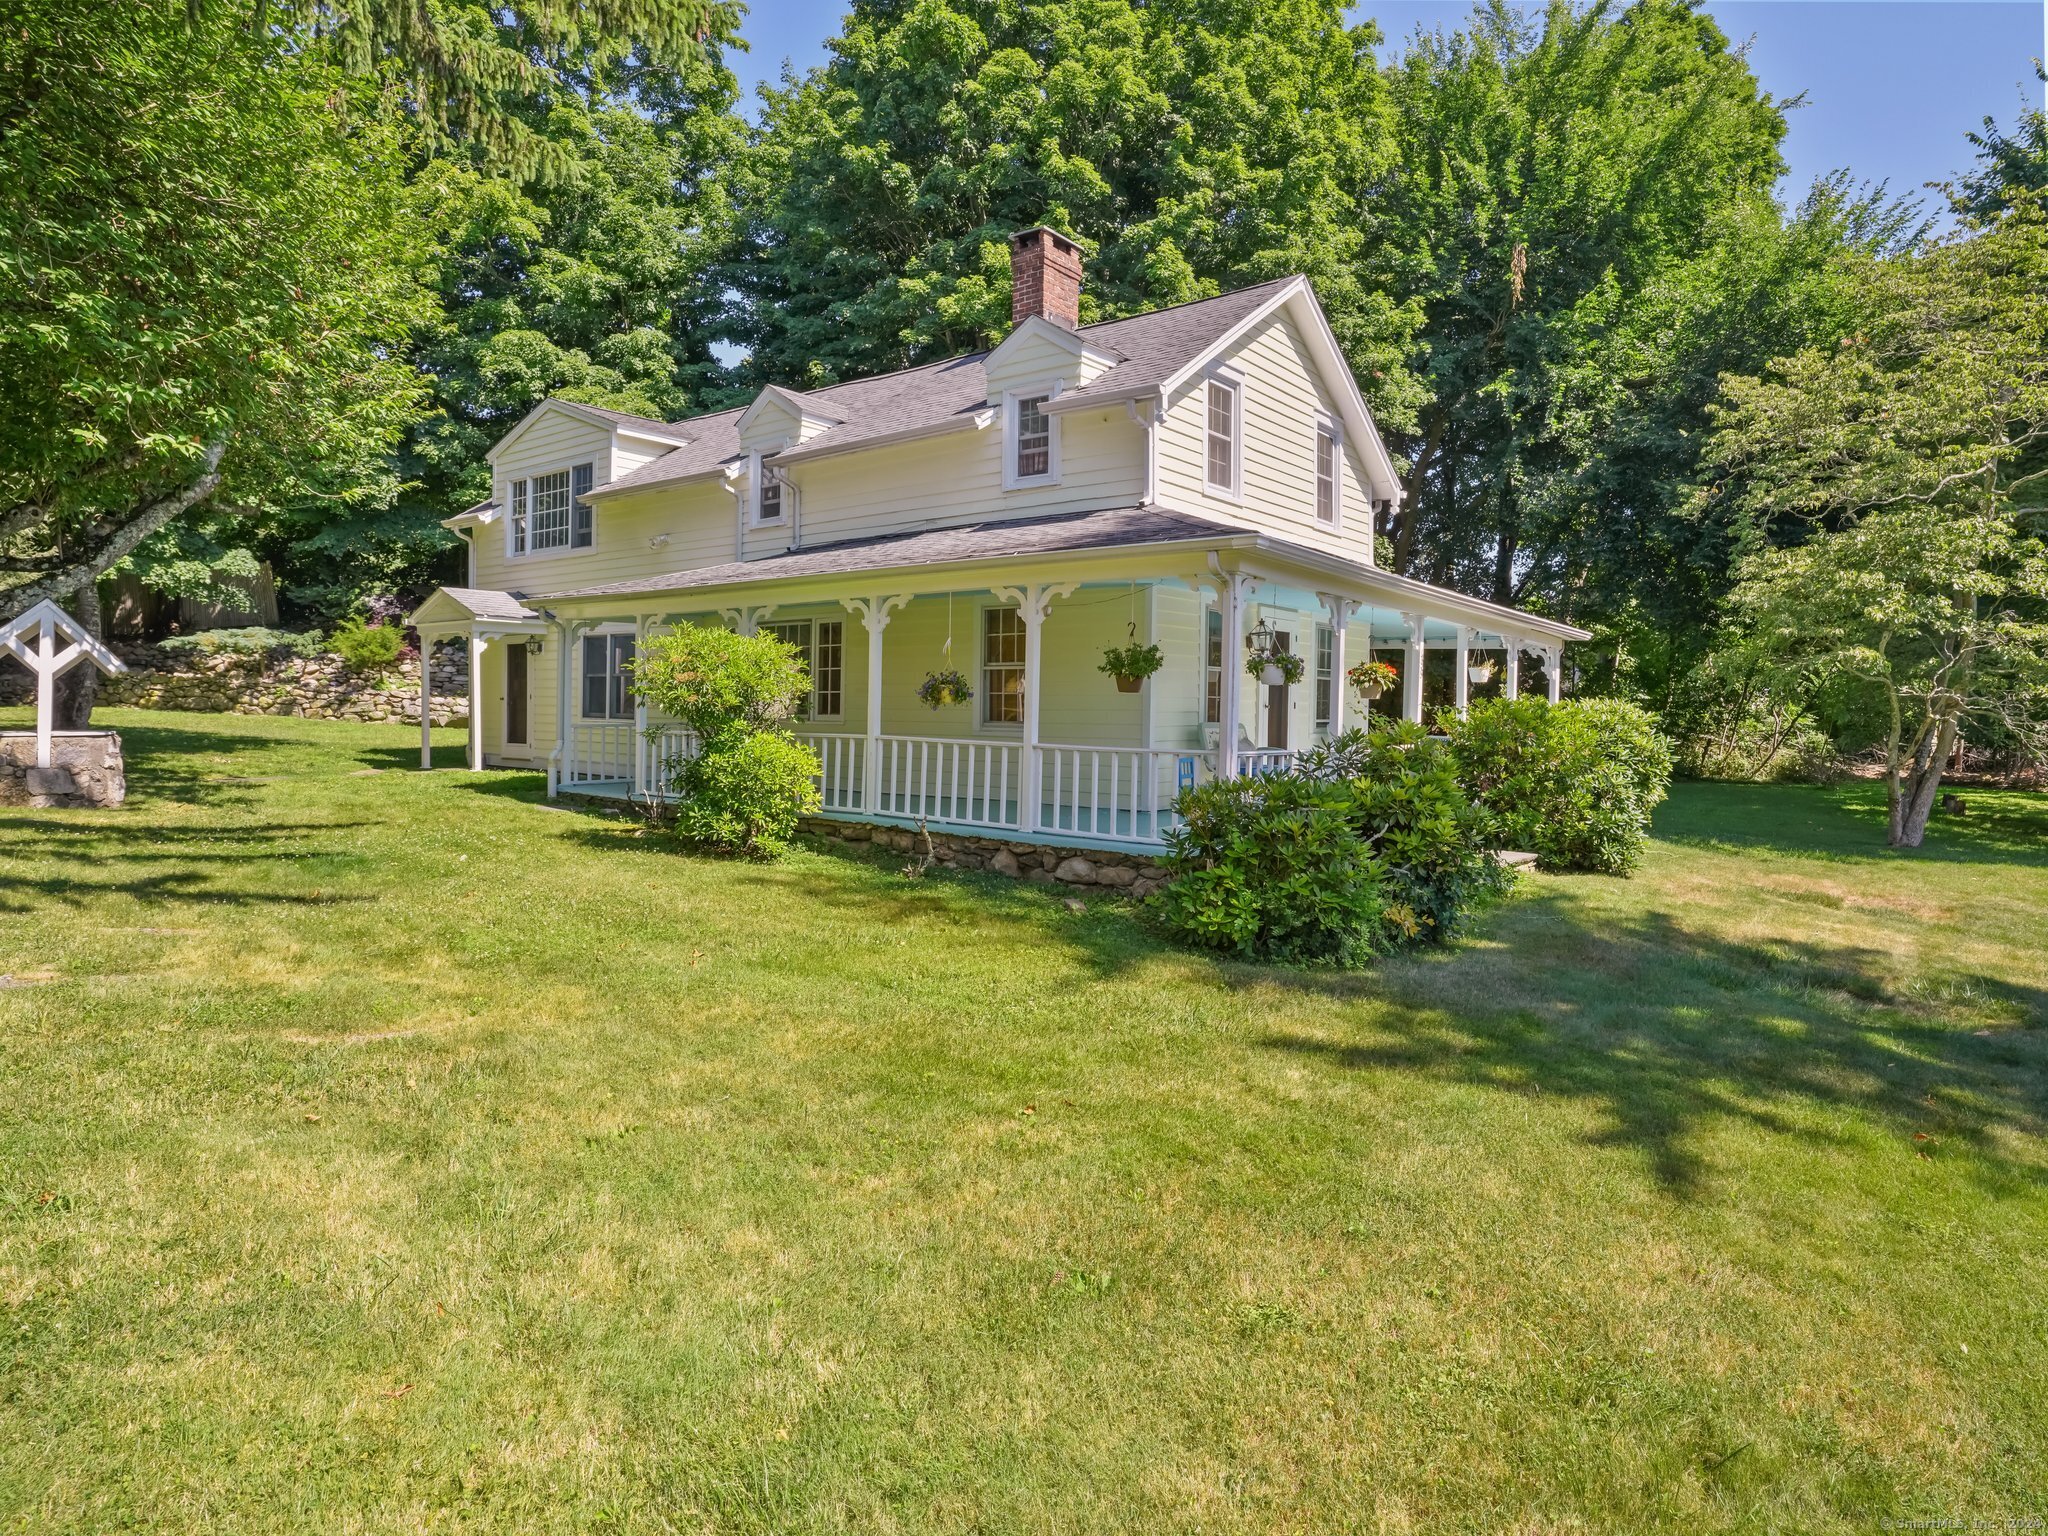 Step into history with this charming antique colonial, built in 1856 and nestled on .78-acre lot in the heart of Westport.  Picture-perfect moments await on the inviting wrap-around porch, adorned with exquisite wood trim detail, where you can enjoy the surroundings any time of the day. As you enter, the home welcomes you with stunning Hemlock hardwood floors that lead you through the open living spaces. Unwind in the comfort of the sitting room, graced by the allure of a Yodel wood-burning fireplace, and open to the eat-in-kitchen. A main floor bedroom, with private entrance and adjoining bathroom, adds versatility. A primary suite plus two additional bedrooms and a hall bathroom are found on the second level.  The detached garage with a tandem extension offers ample space for storage or a workshop, catering to your practical needs. Conveniently located in the center of town, this residence provides easy access to all the fine amenities Westport has to offer. Don't miss the opportunity to own a piece of history with this enchanting colonial home -embrace the timeless allure and make this historic gem your own.